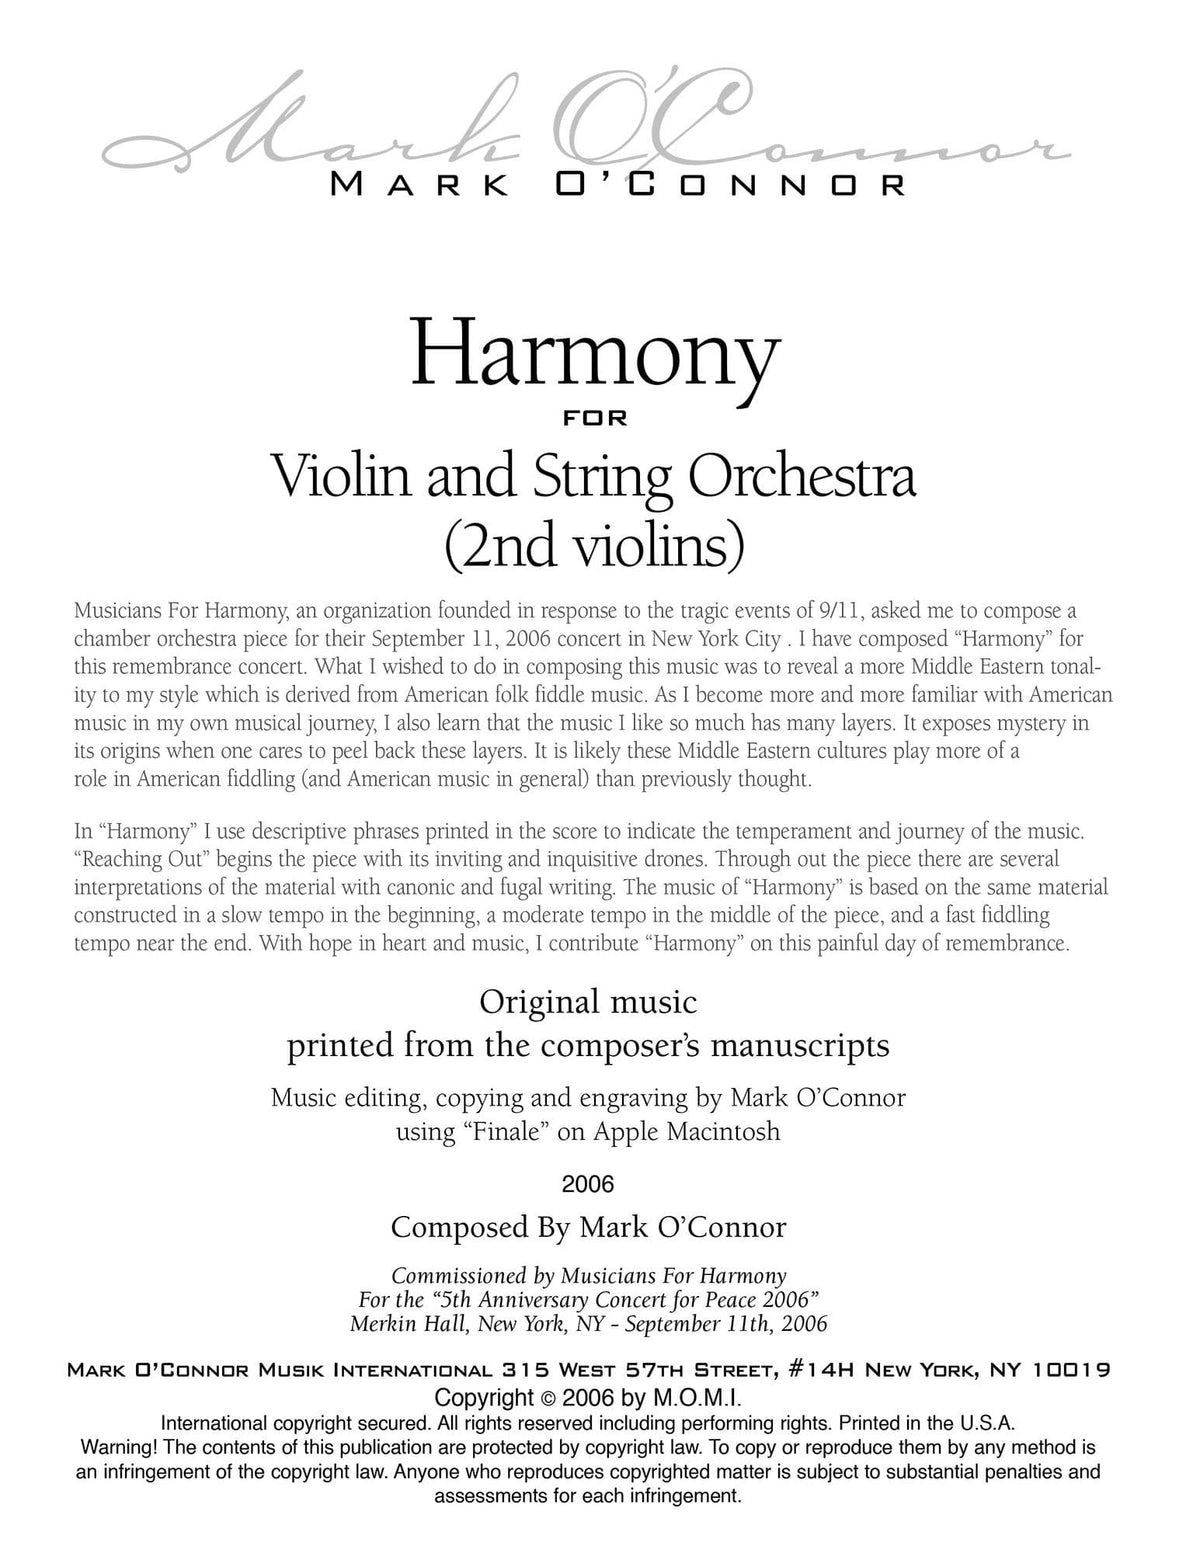 O'Connor, Mark - Harmony for Violin and Strings - 2nd Violins - Digital Download